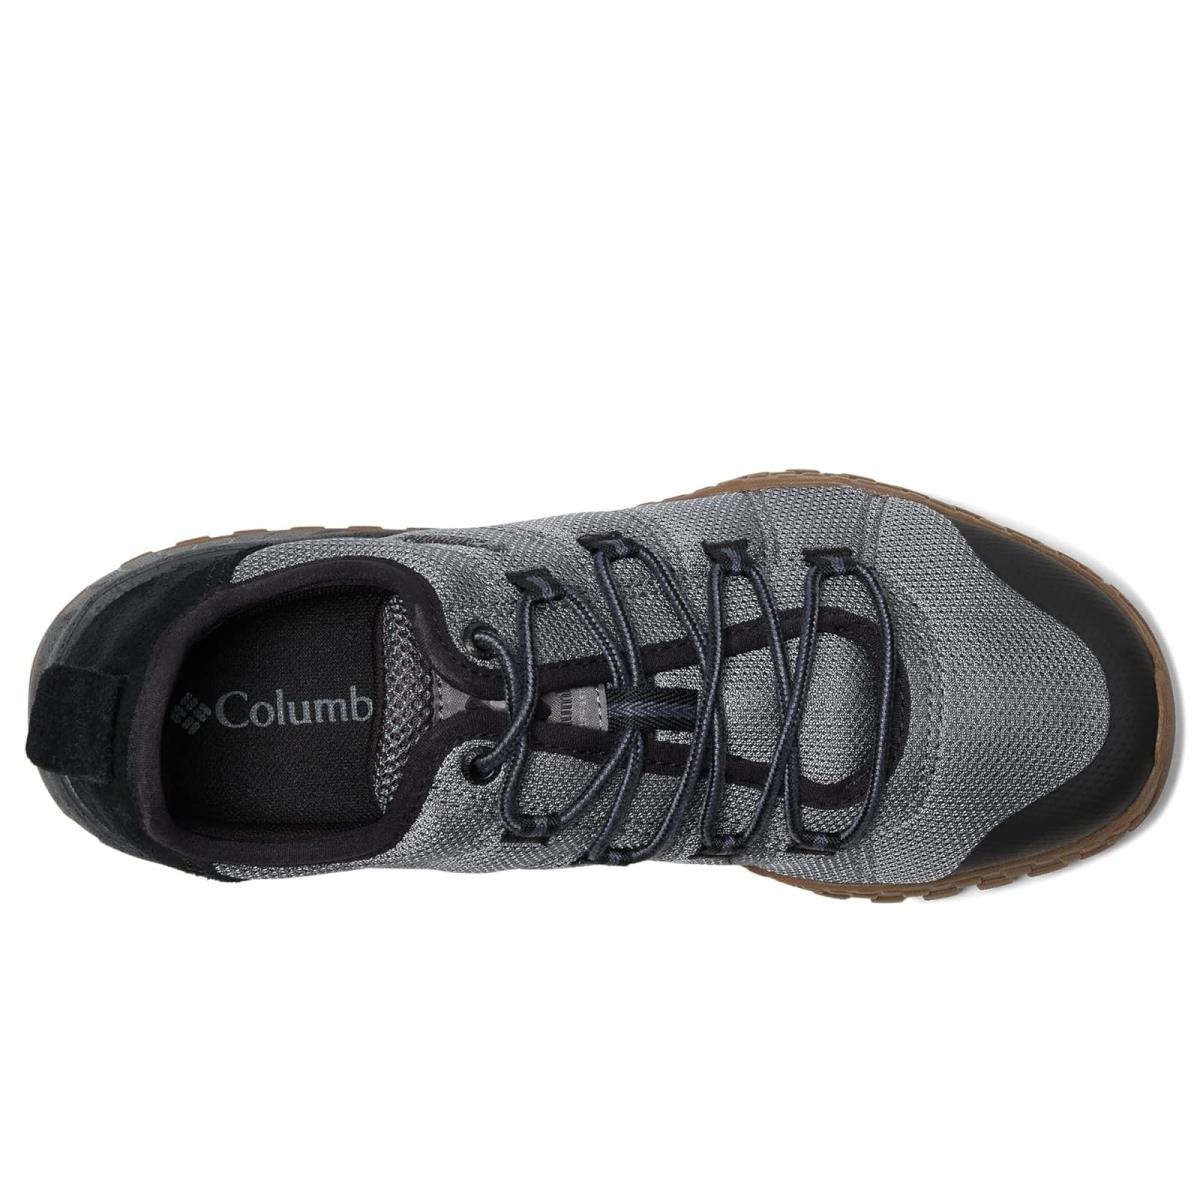 Columbia shoes  14